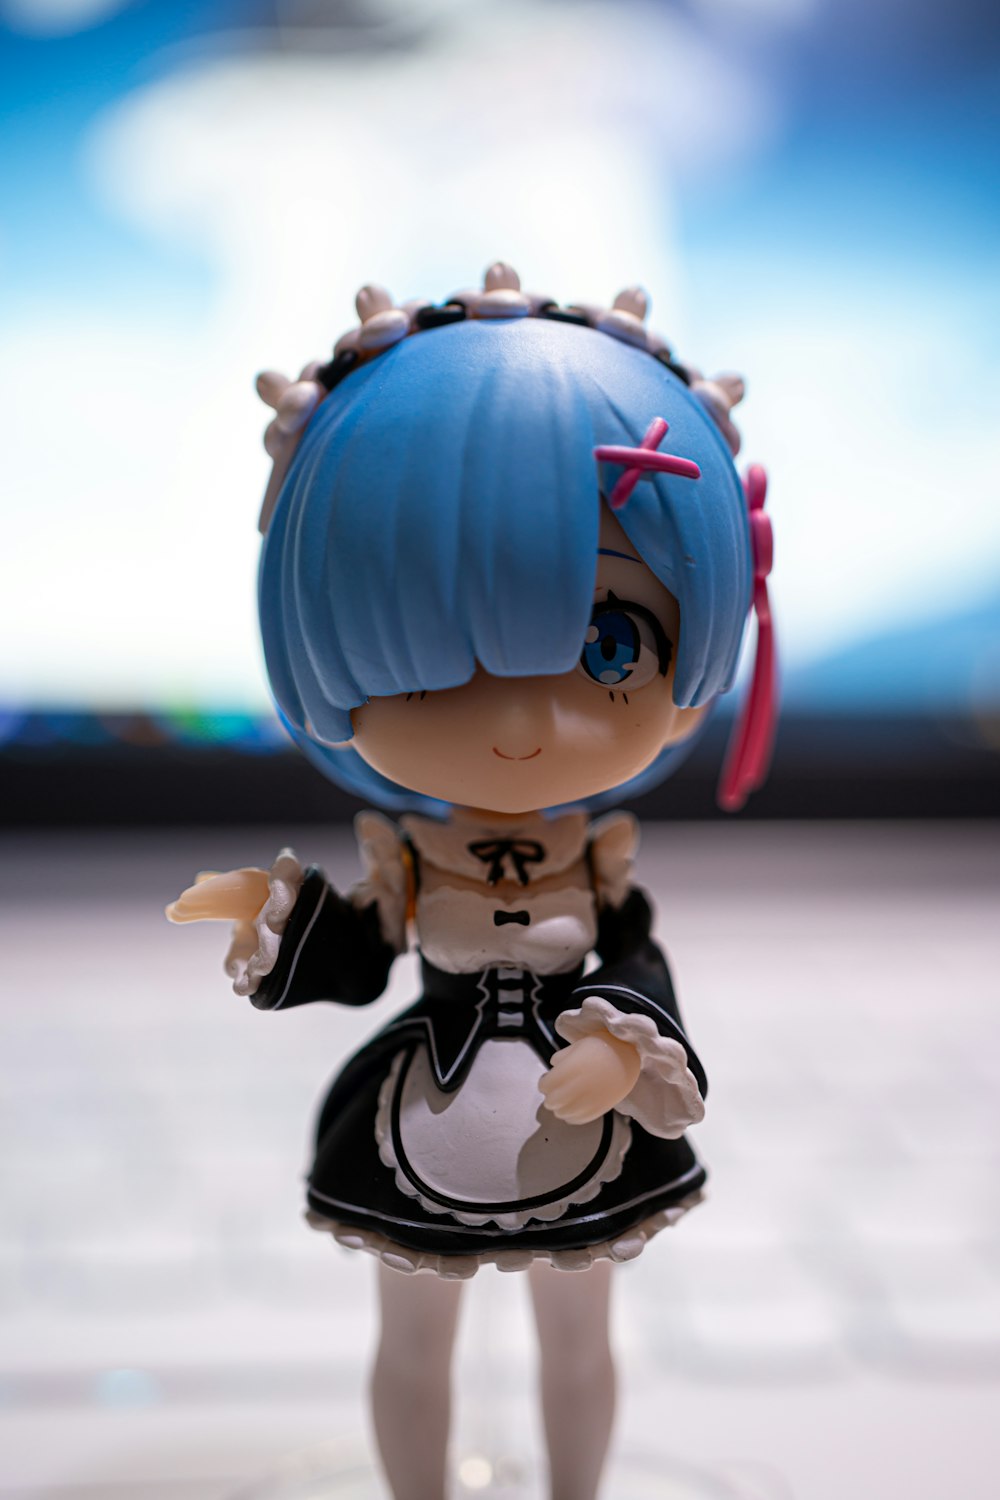 a doll with blue hair wearing a black and white outfit